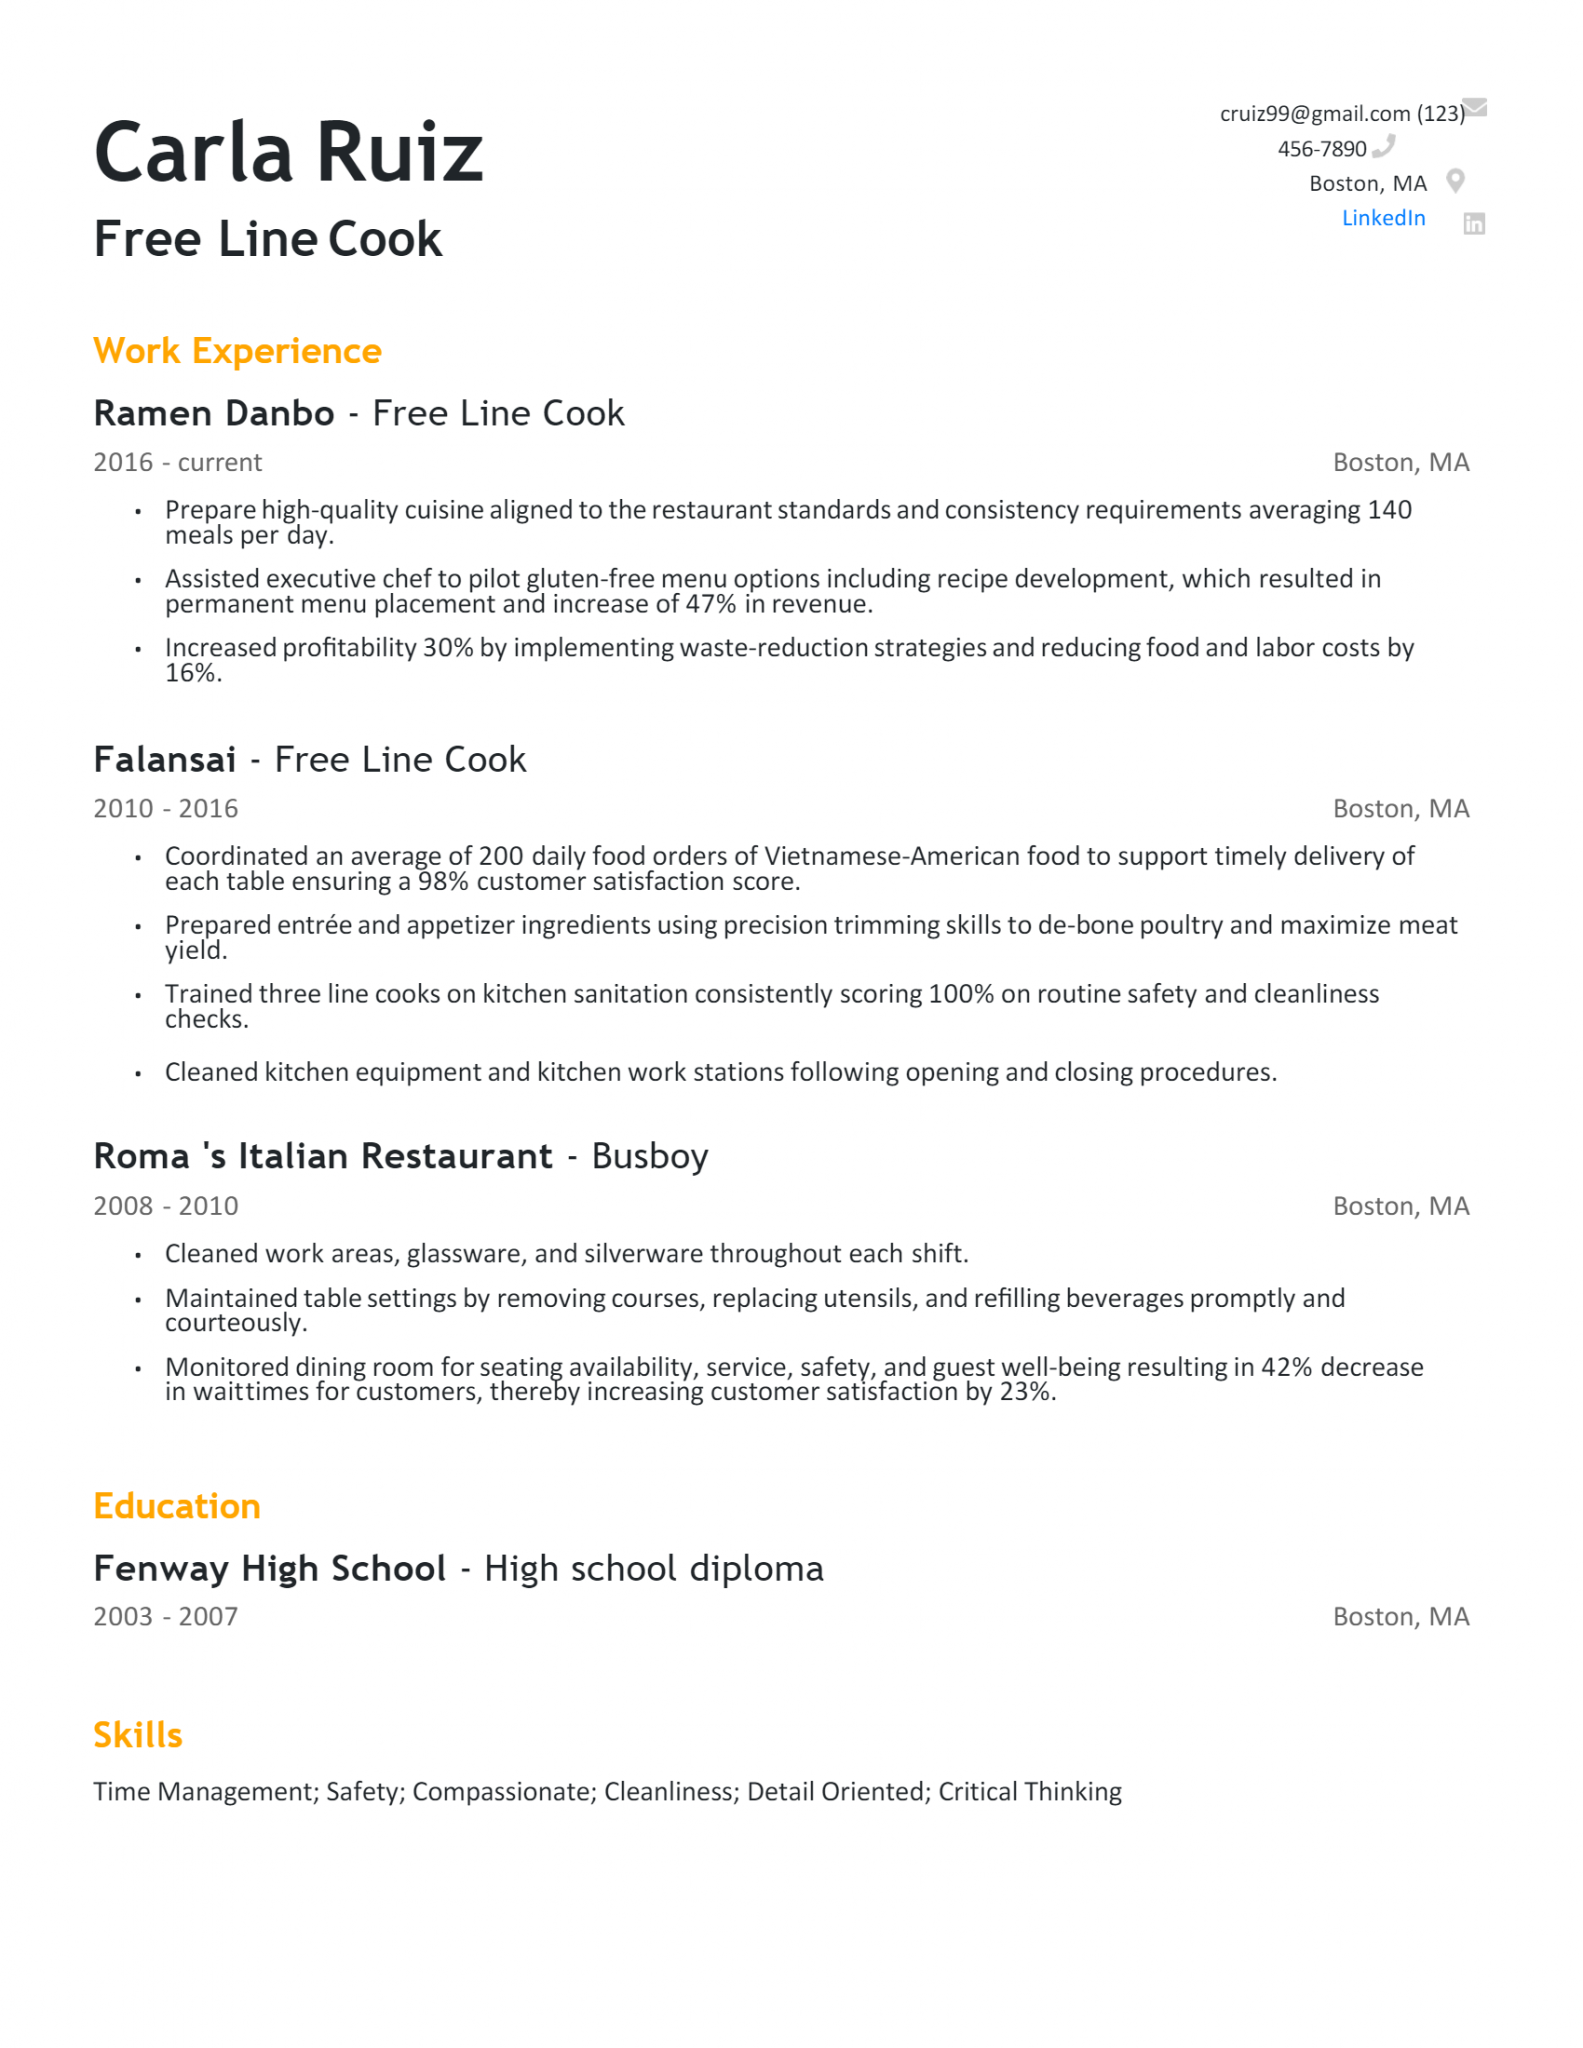 Download Free Free Line Cook Resume Docx (Word) Template on